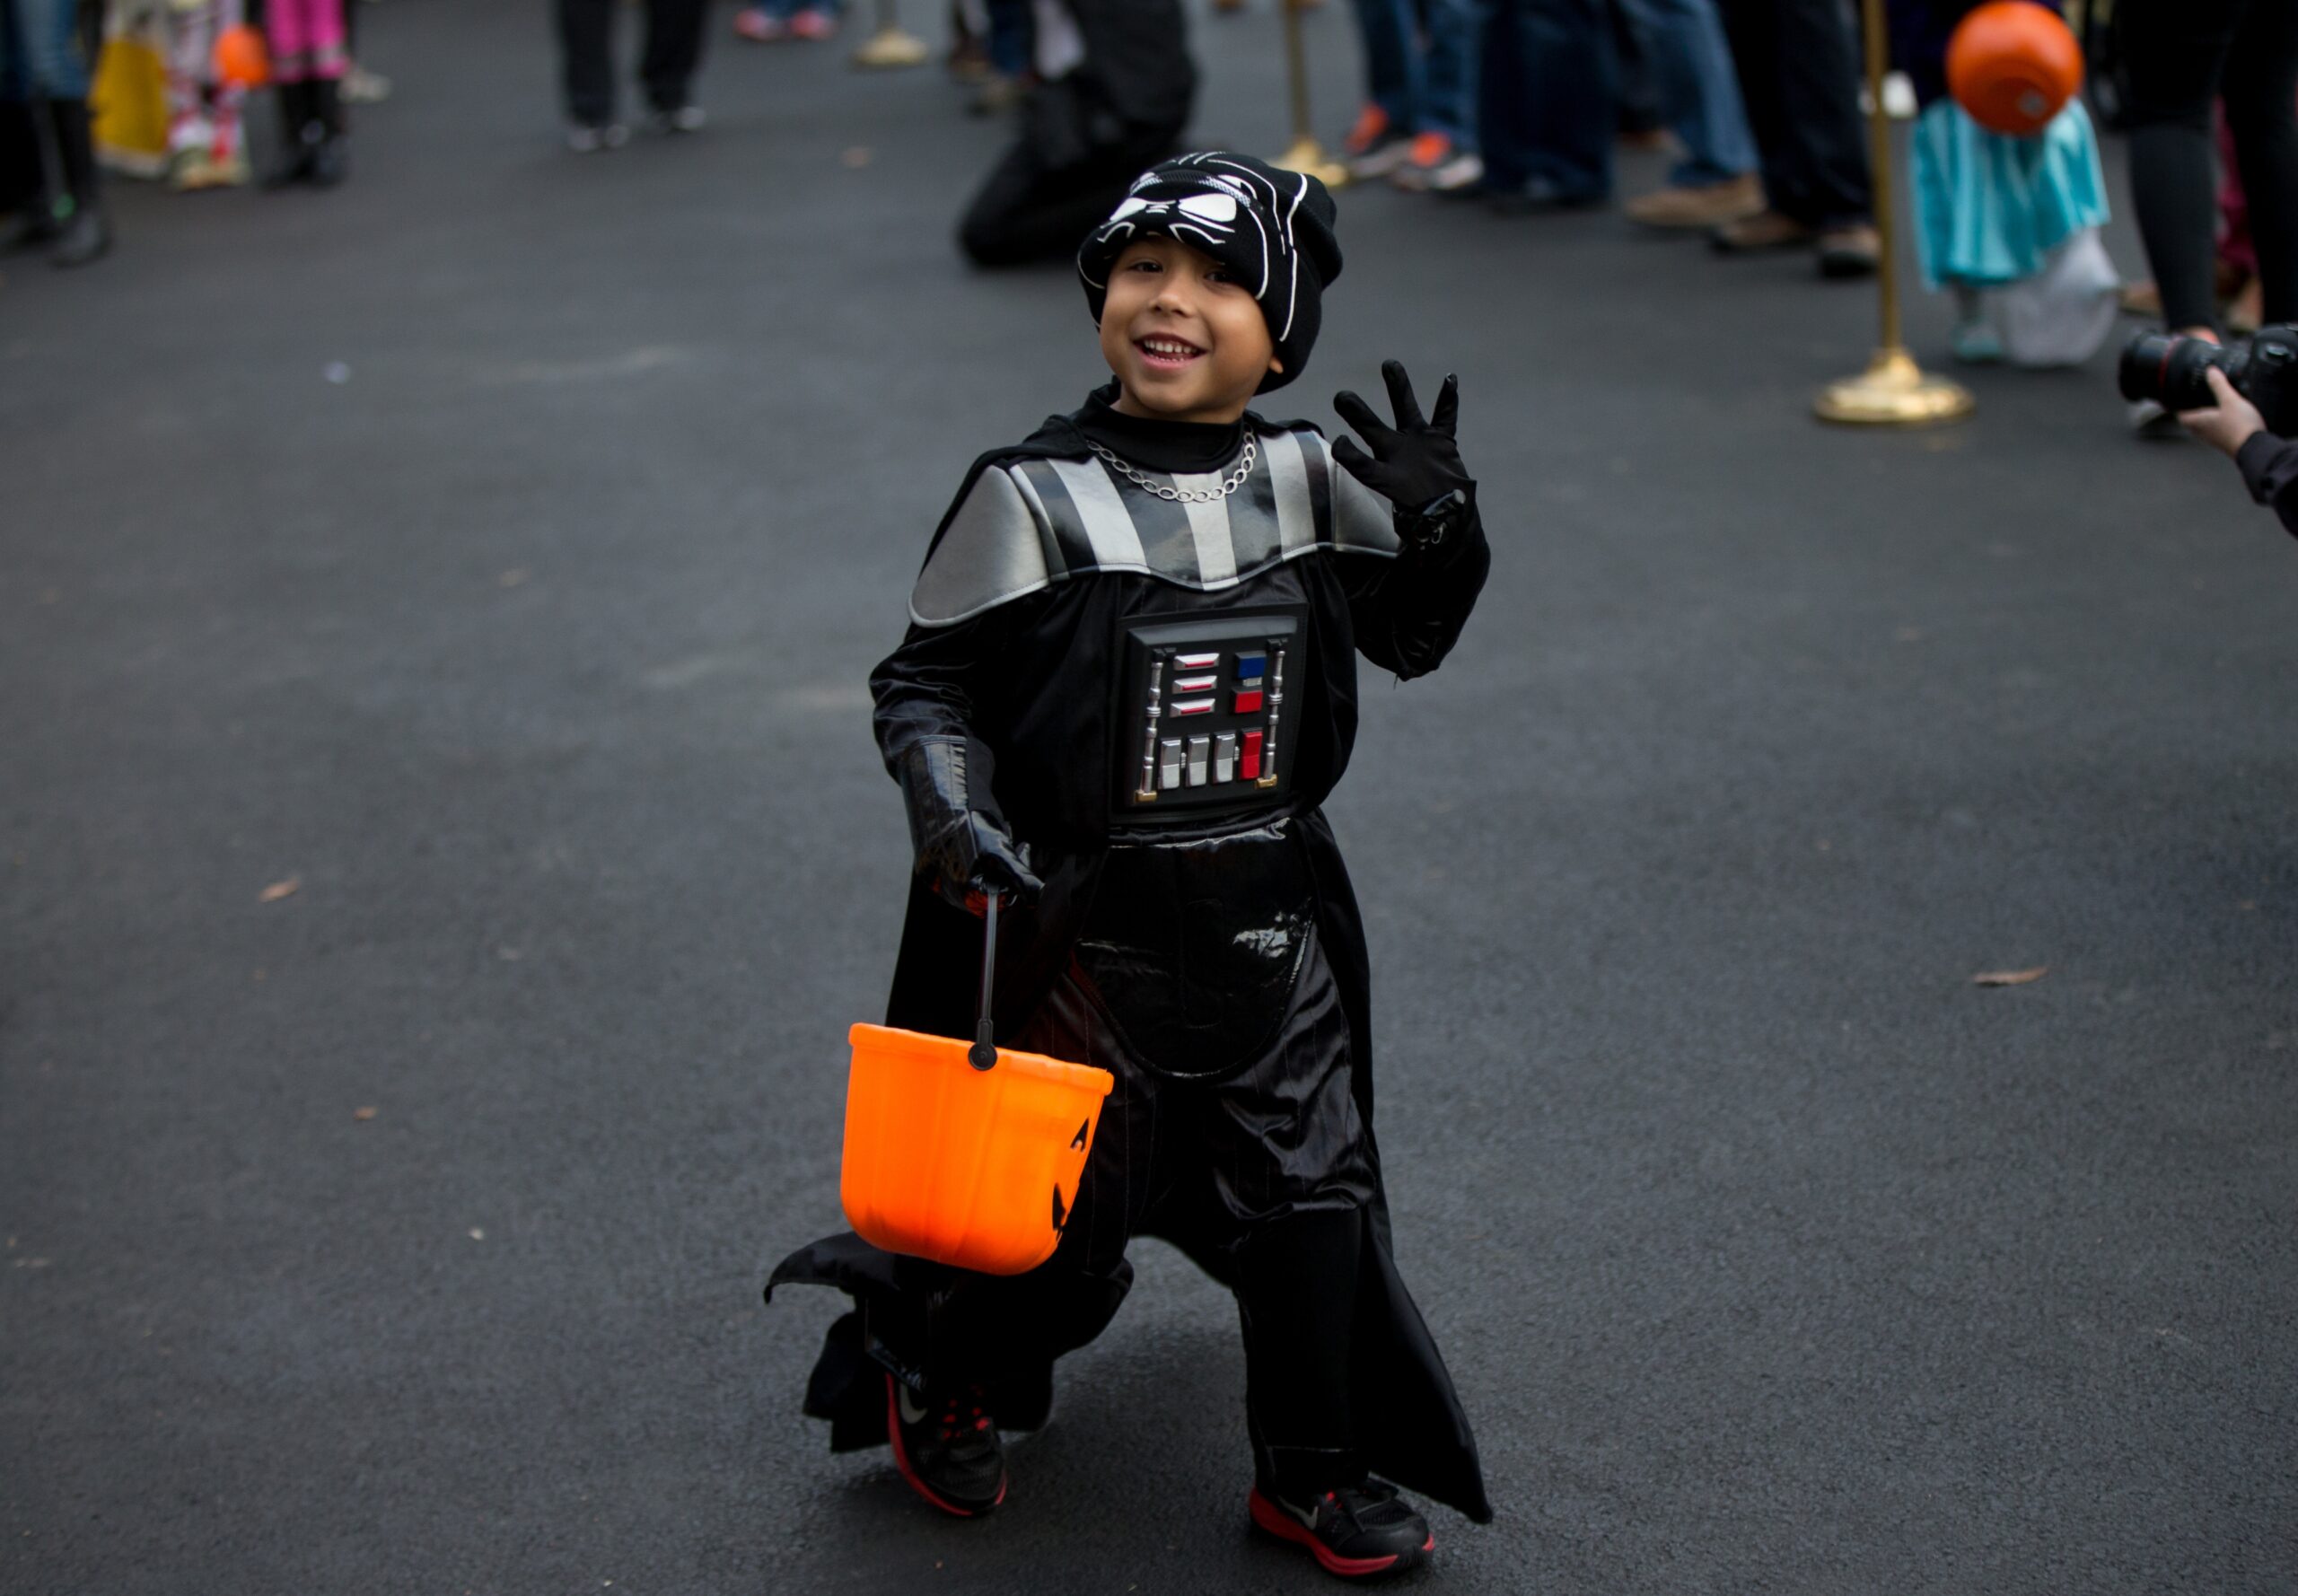 How To Trick-Or-Treat Safely During A Pandemic, According To An Epidemiologist